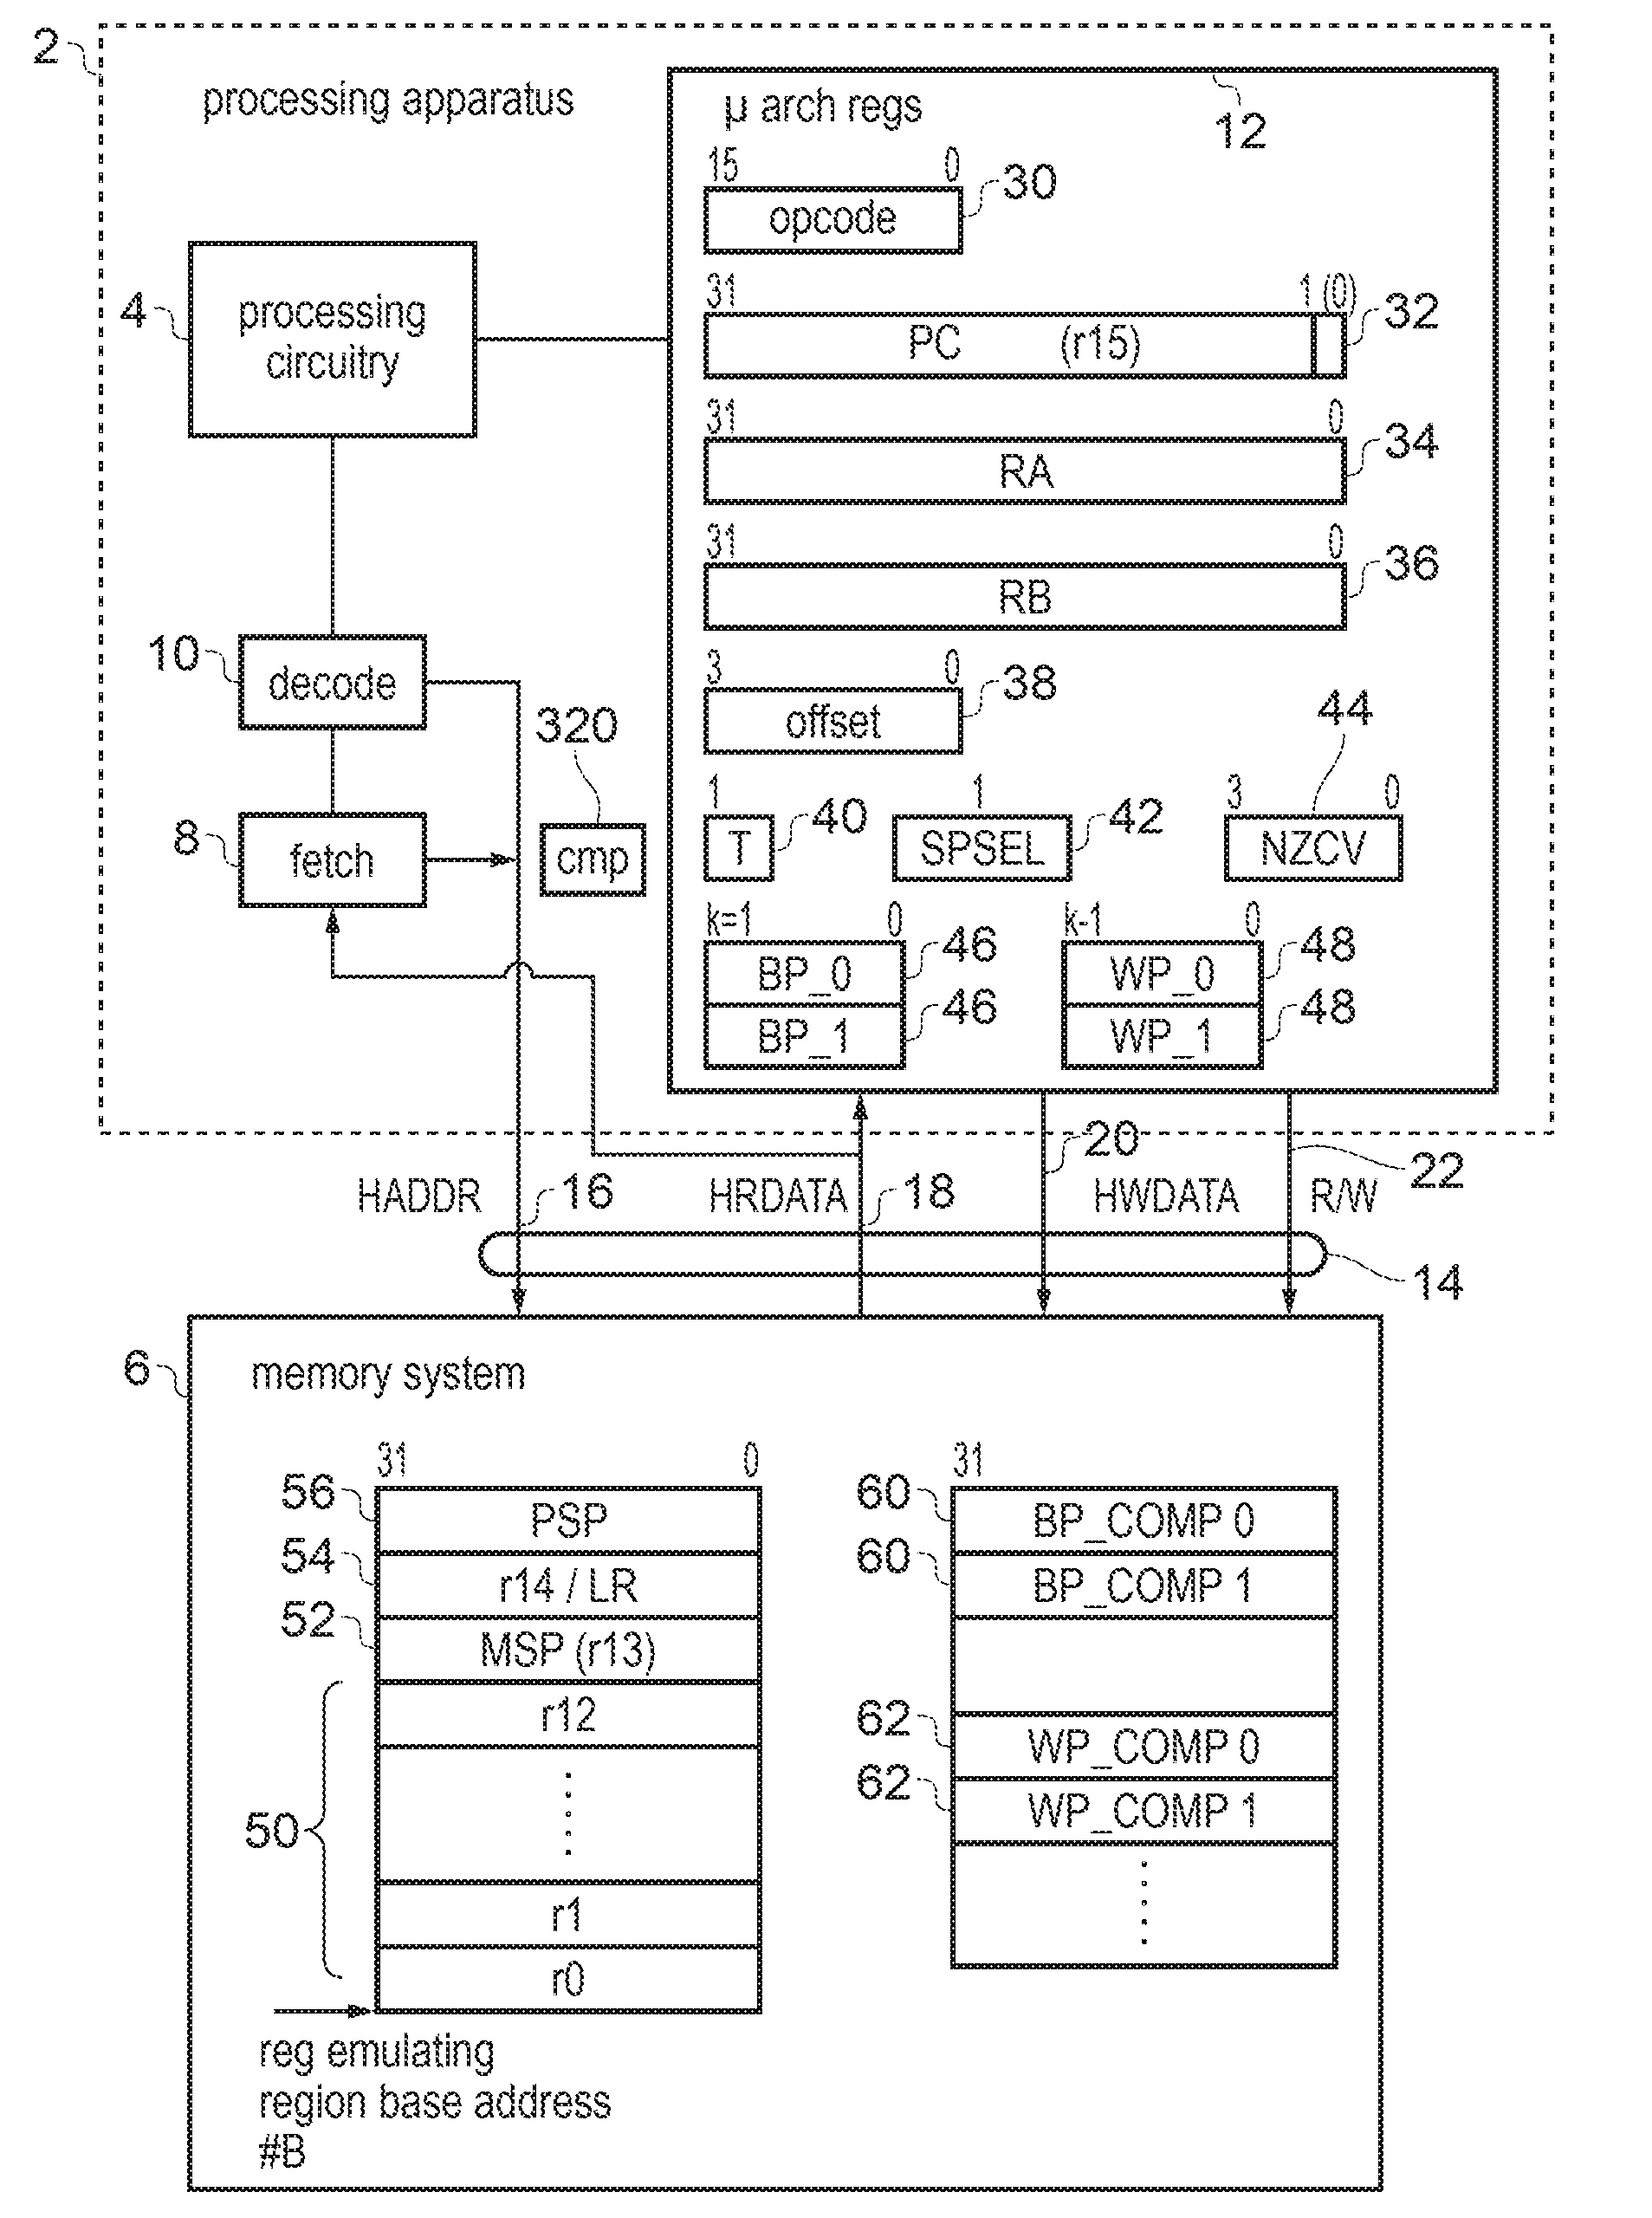 Apparatus with reduced hardware register set